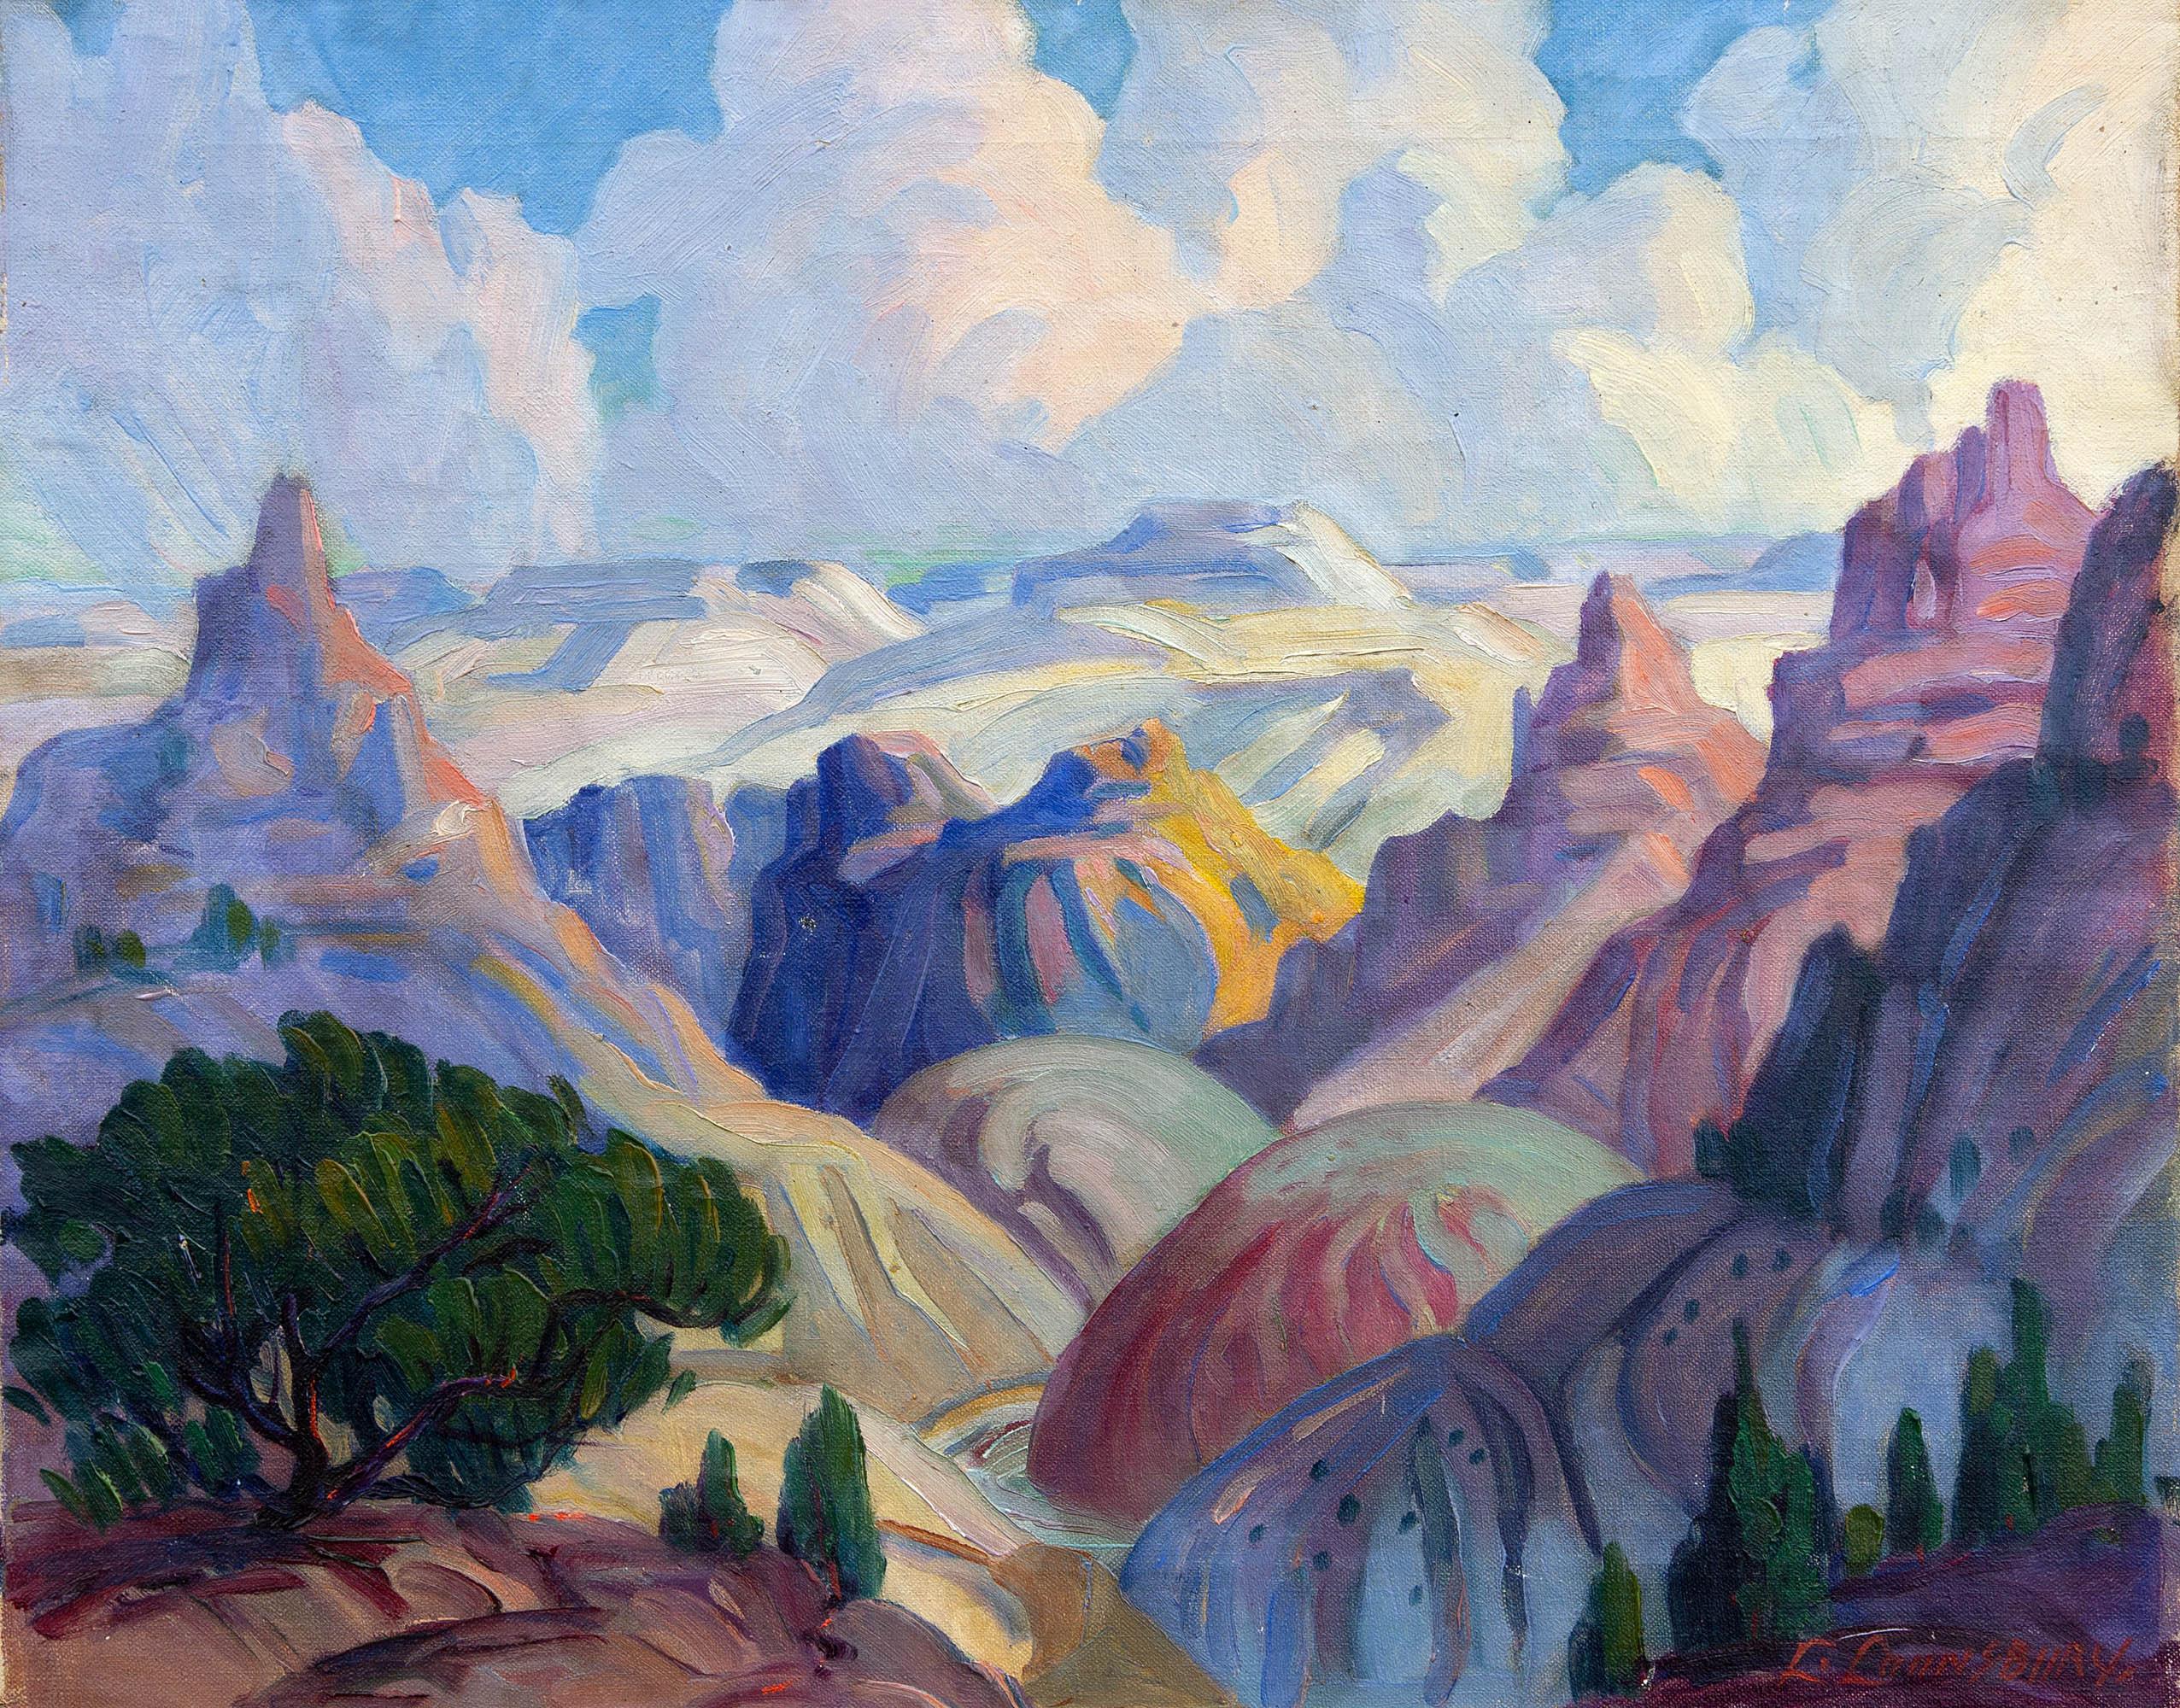 Unknown Landscape Painting - Grand Canyon Modernist Painting by Leslie Lounsbury, circa 1940s